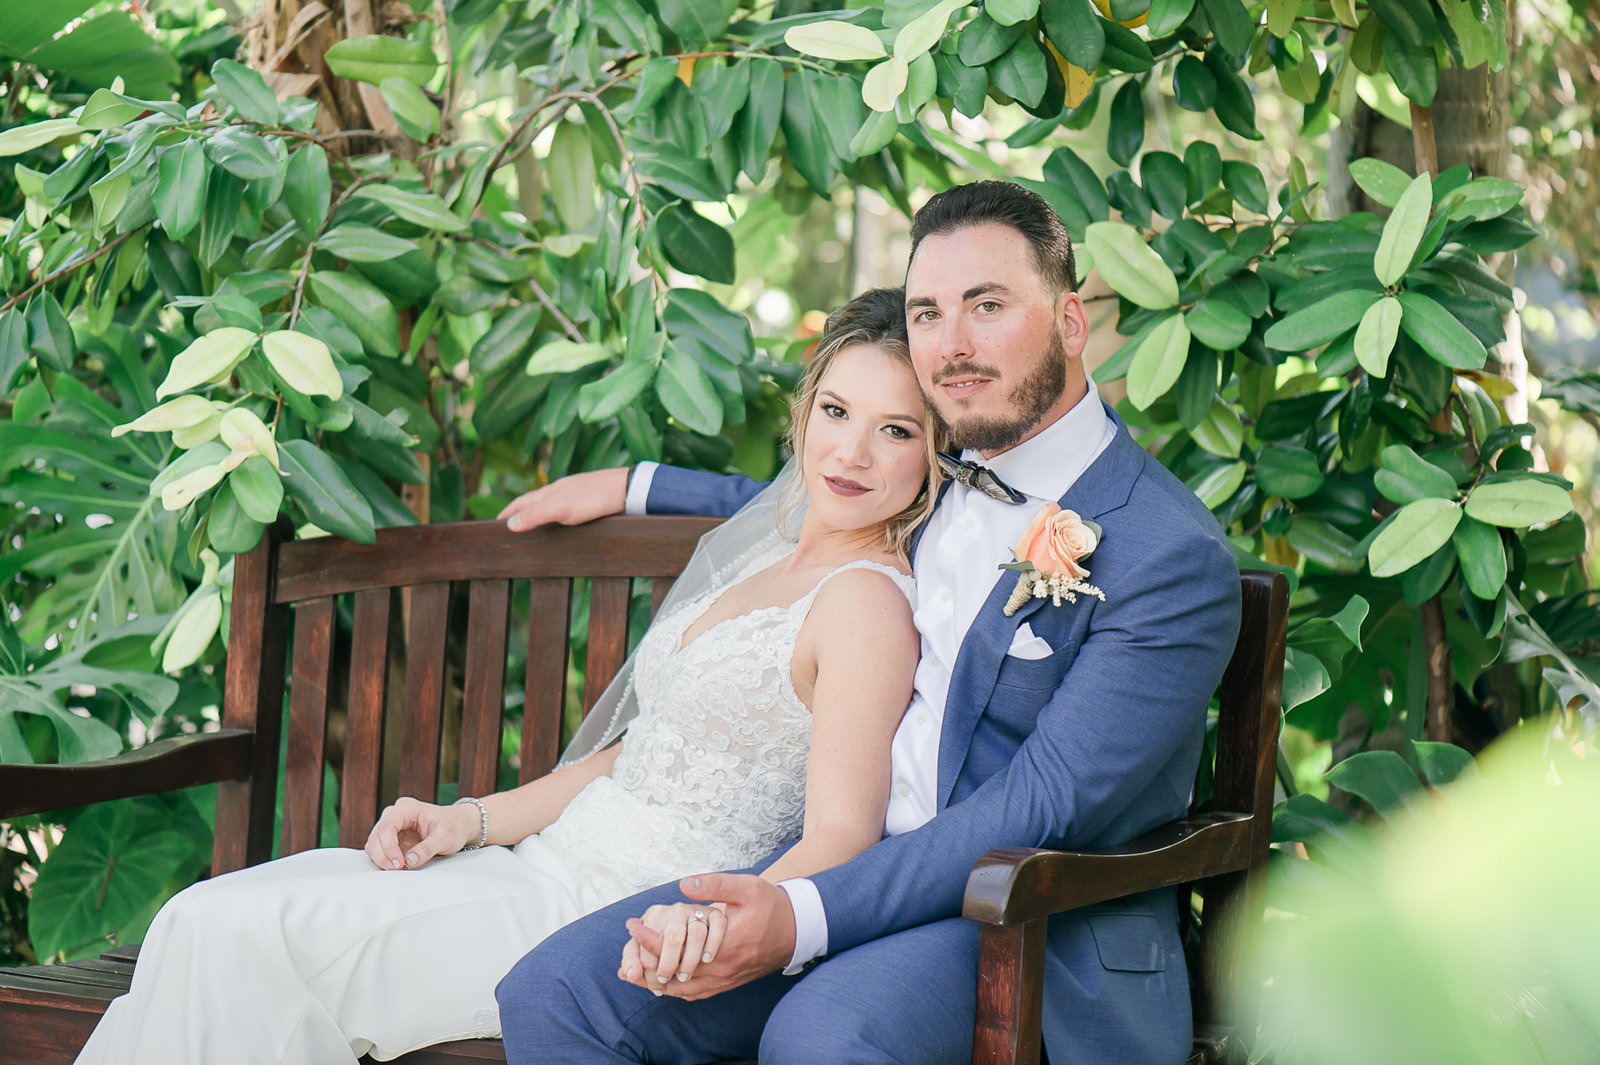 Bride and Groom Rustic Bench - Sundy House by Palm Beach Photography, Inc.